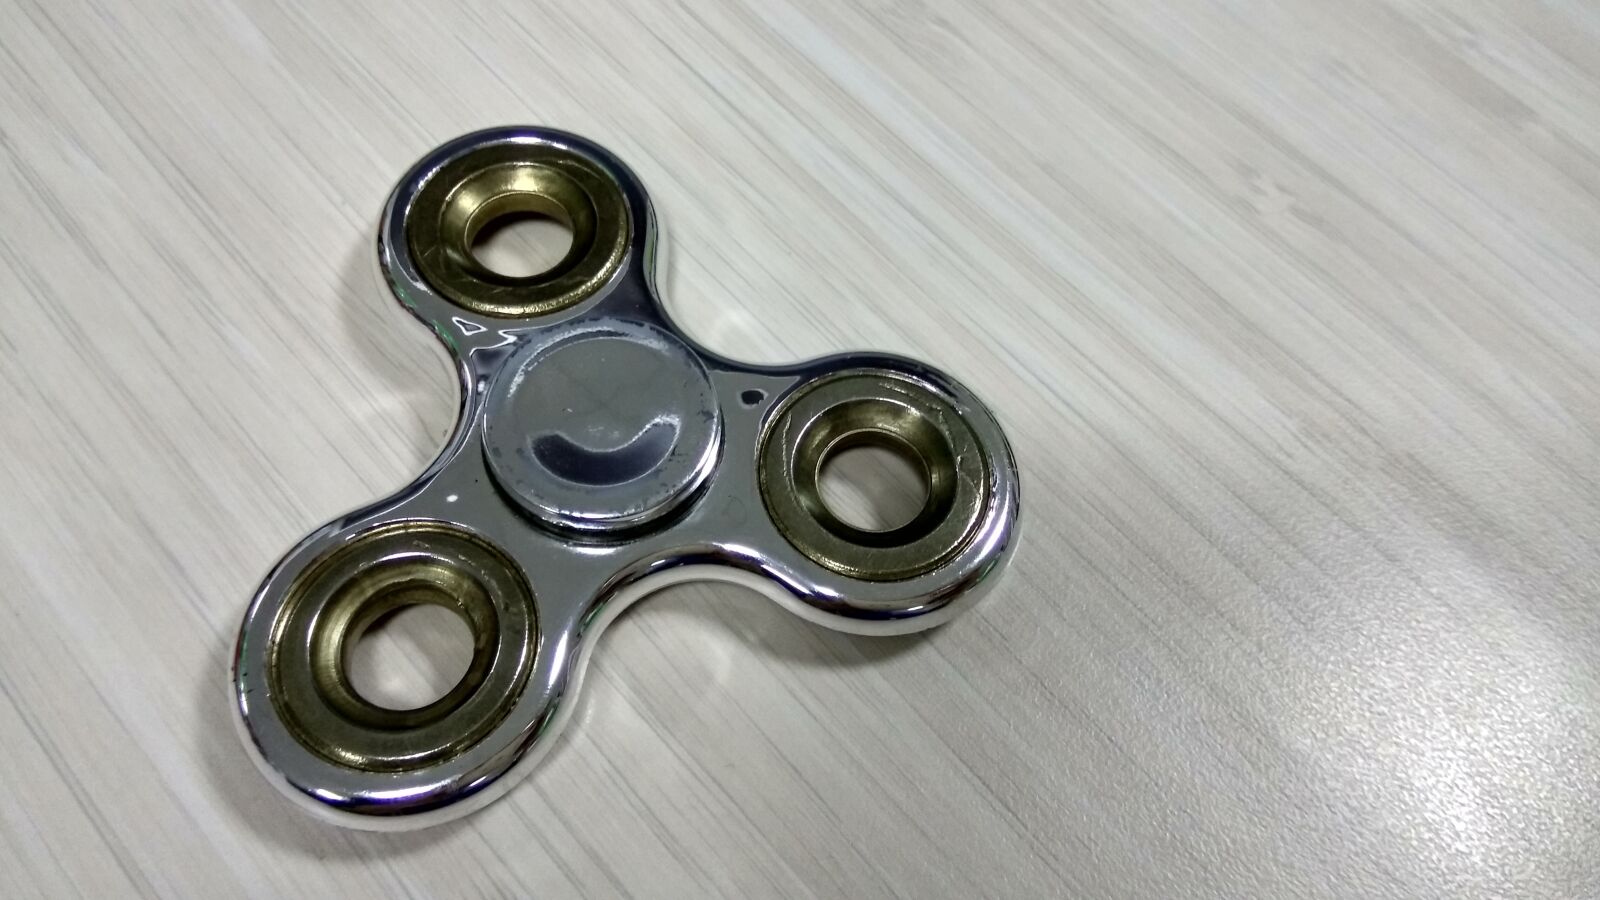 Xiaomi MI MAX sample photo. Spinner, toy, educative photography